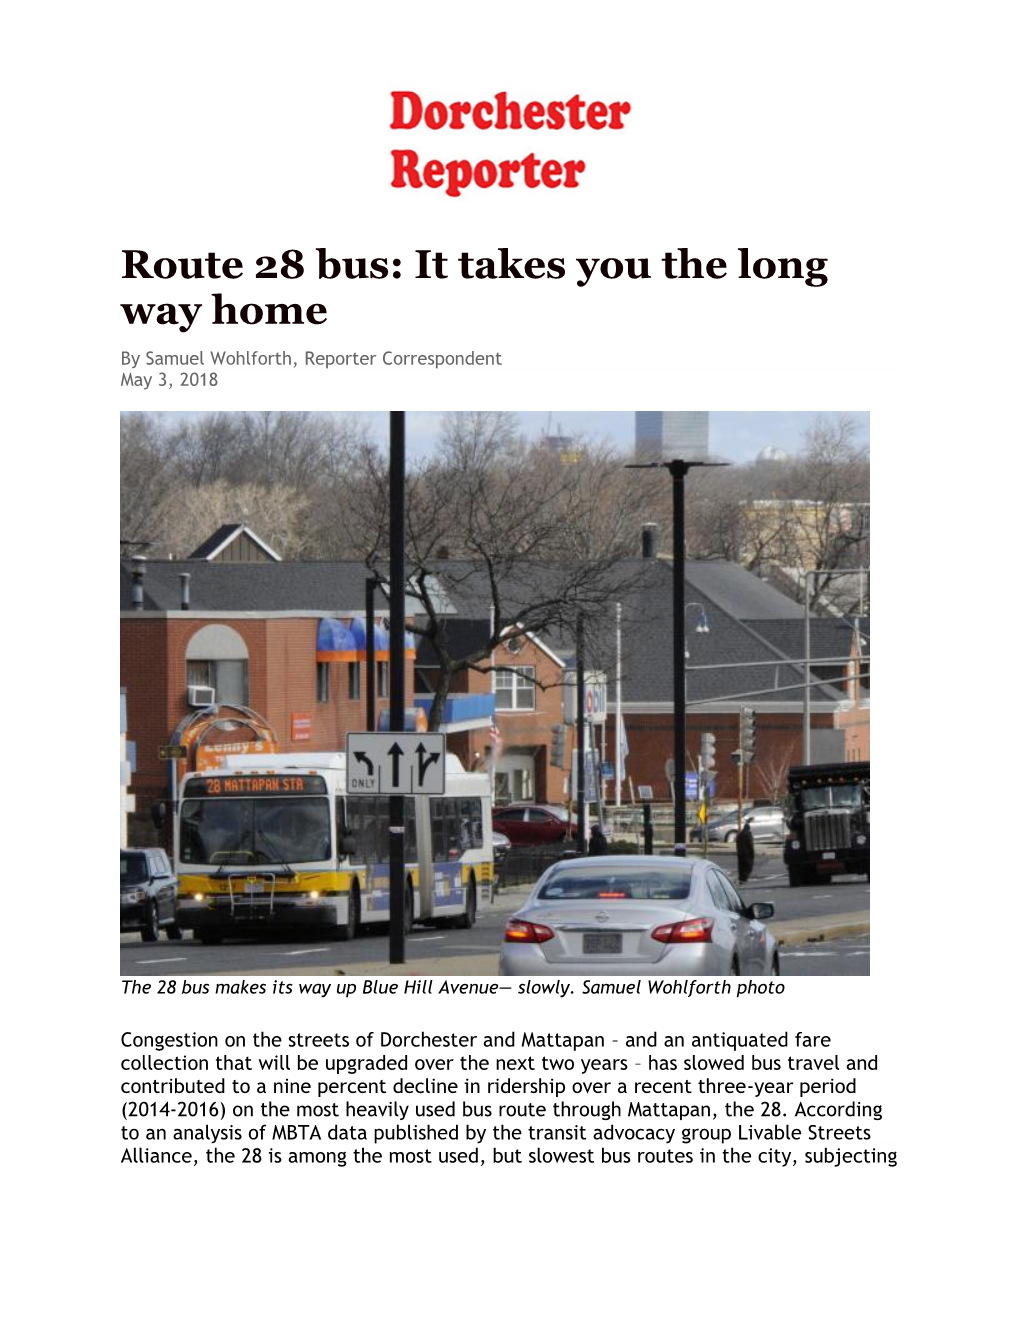 Route 28 Bus: It Takes You the Long Way Home by Samuel Wohlforth, Reporter Correspondent May 3, 2018